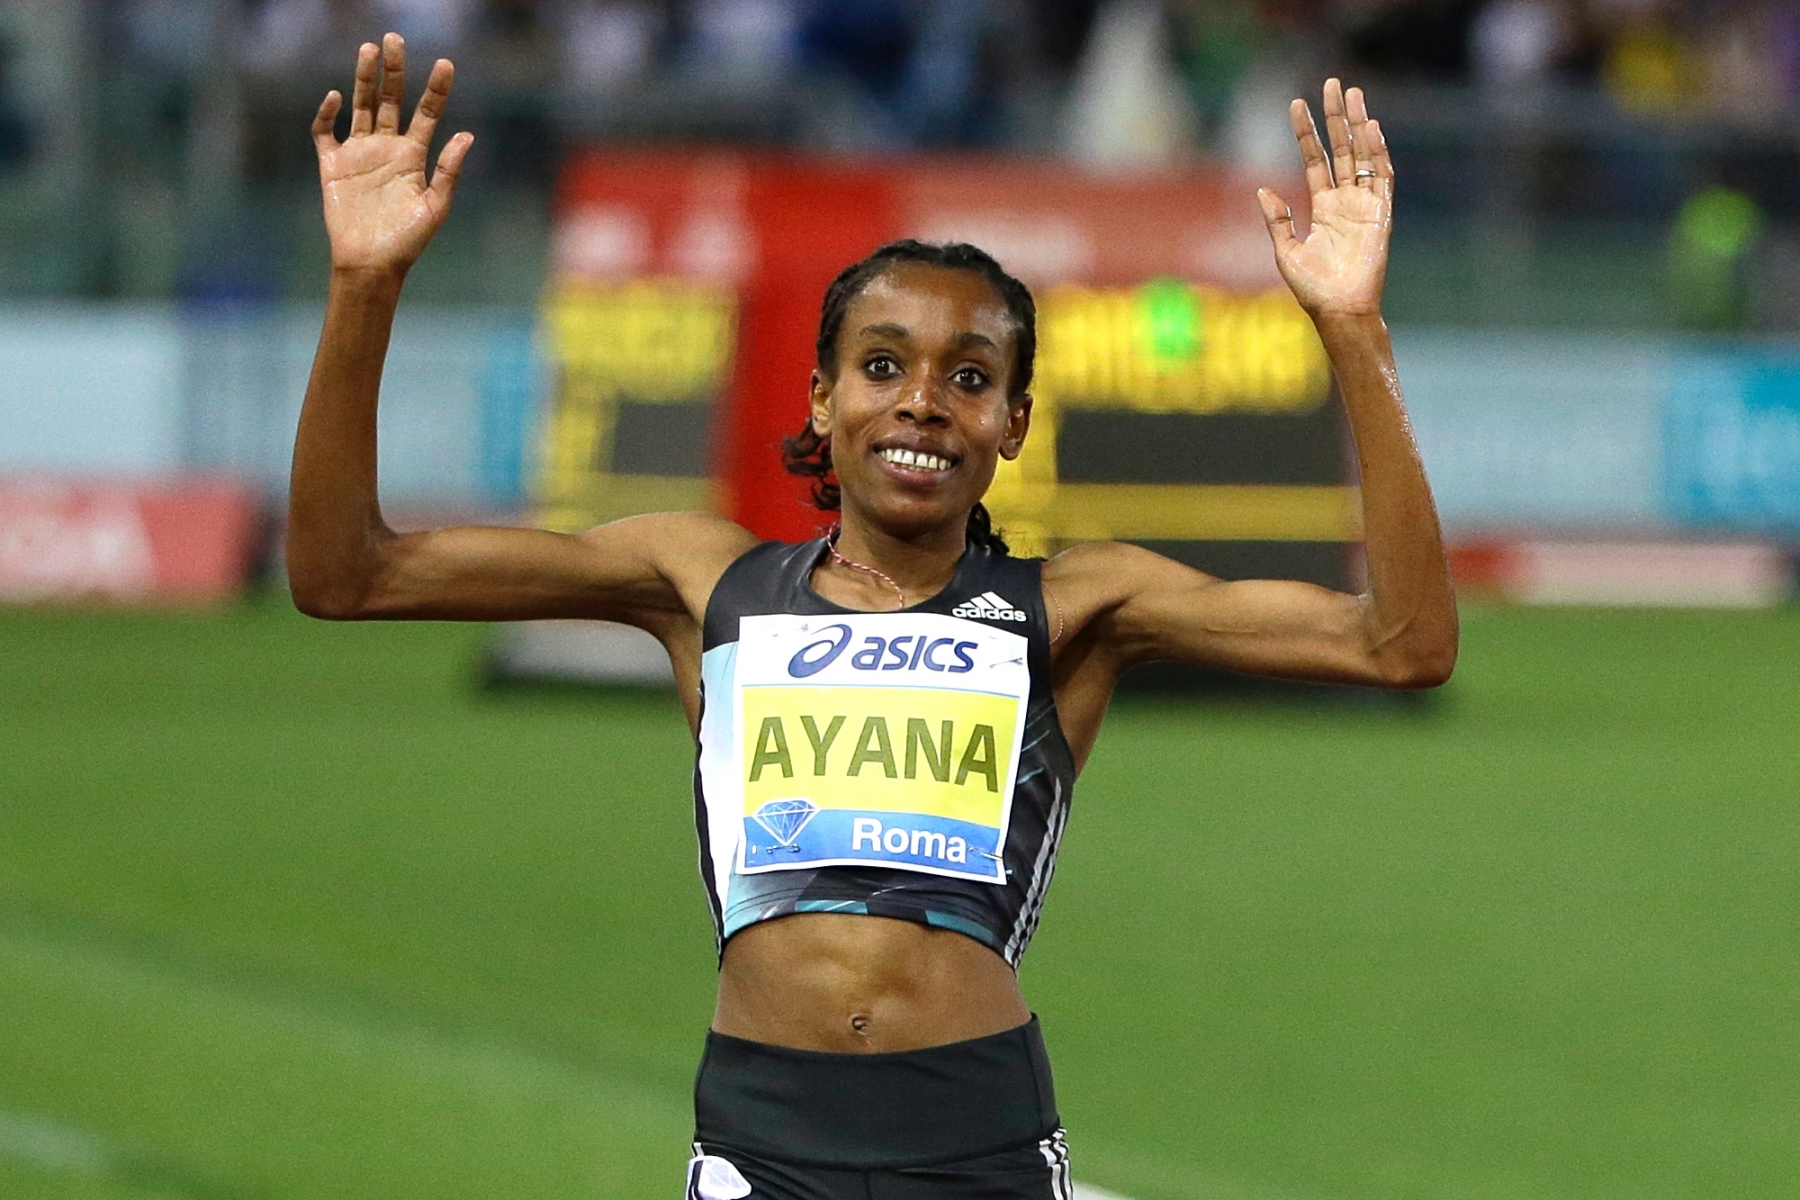 Ethiopia's Almaz Ayana crosses the finish line after winning the women's 5000m event at the Golden Gala IAAF athletic meeting, in Rome's Olympic stadium, Thursday, June 2, 2016. (AP Photo/Gregorio Borgia) Italy Athletics Golden Gala